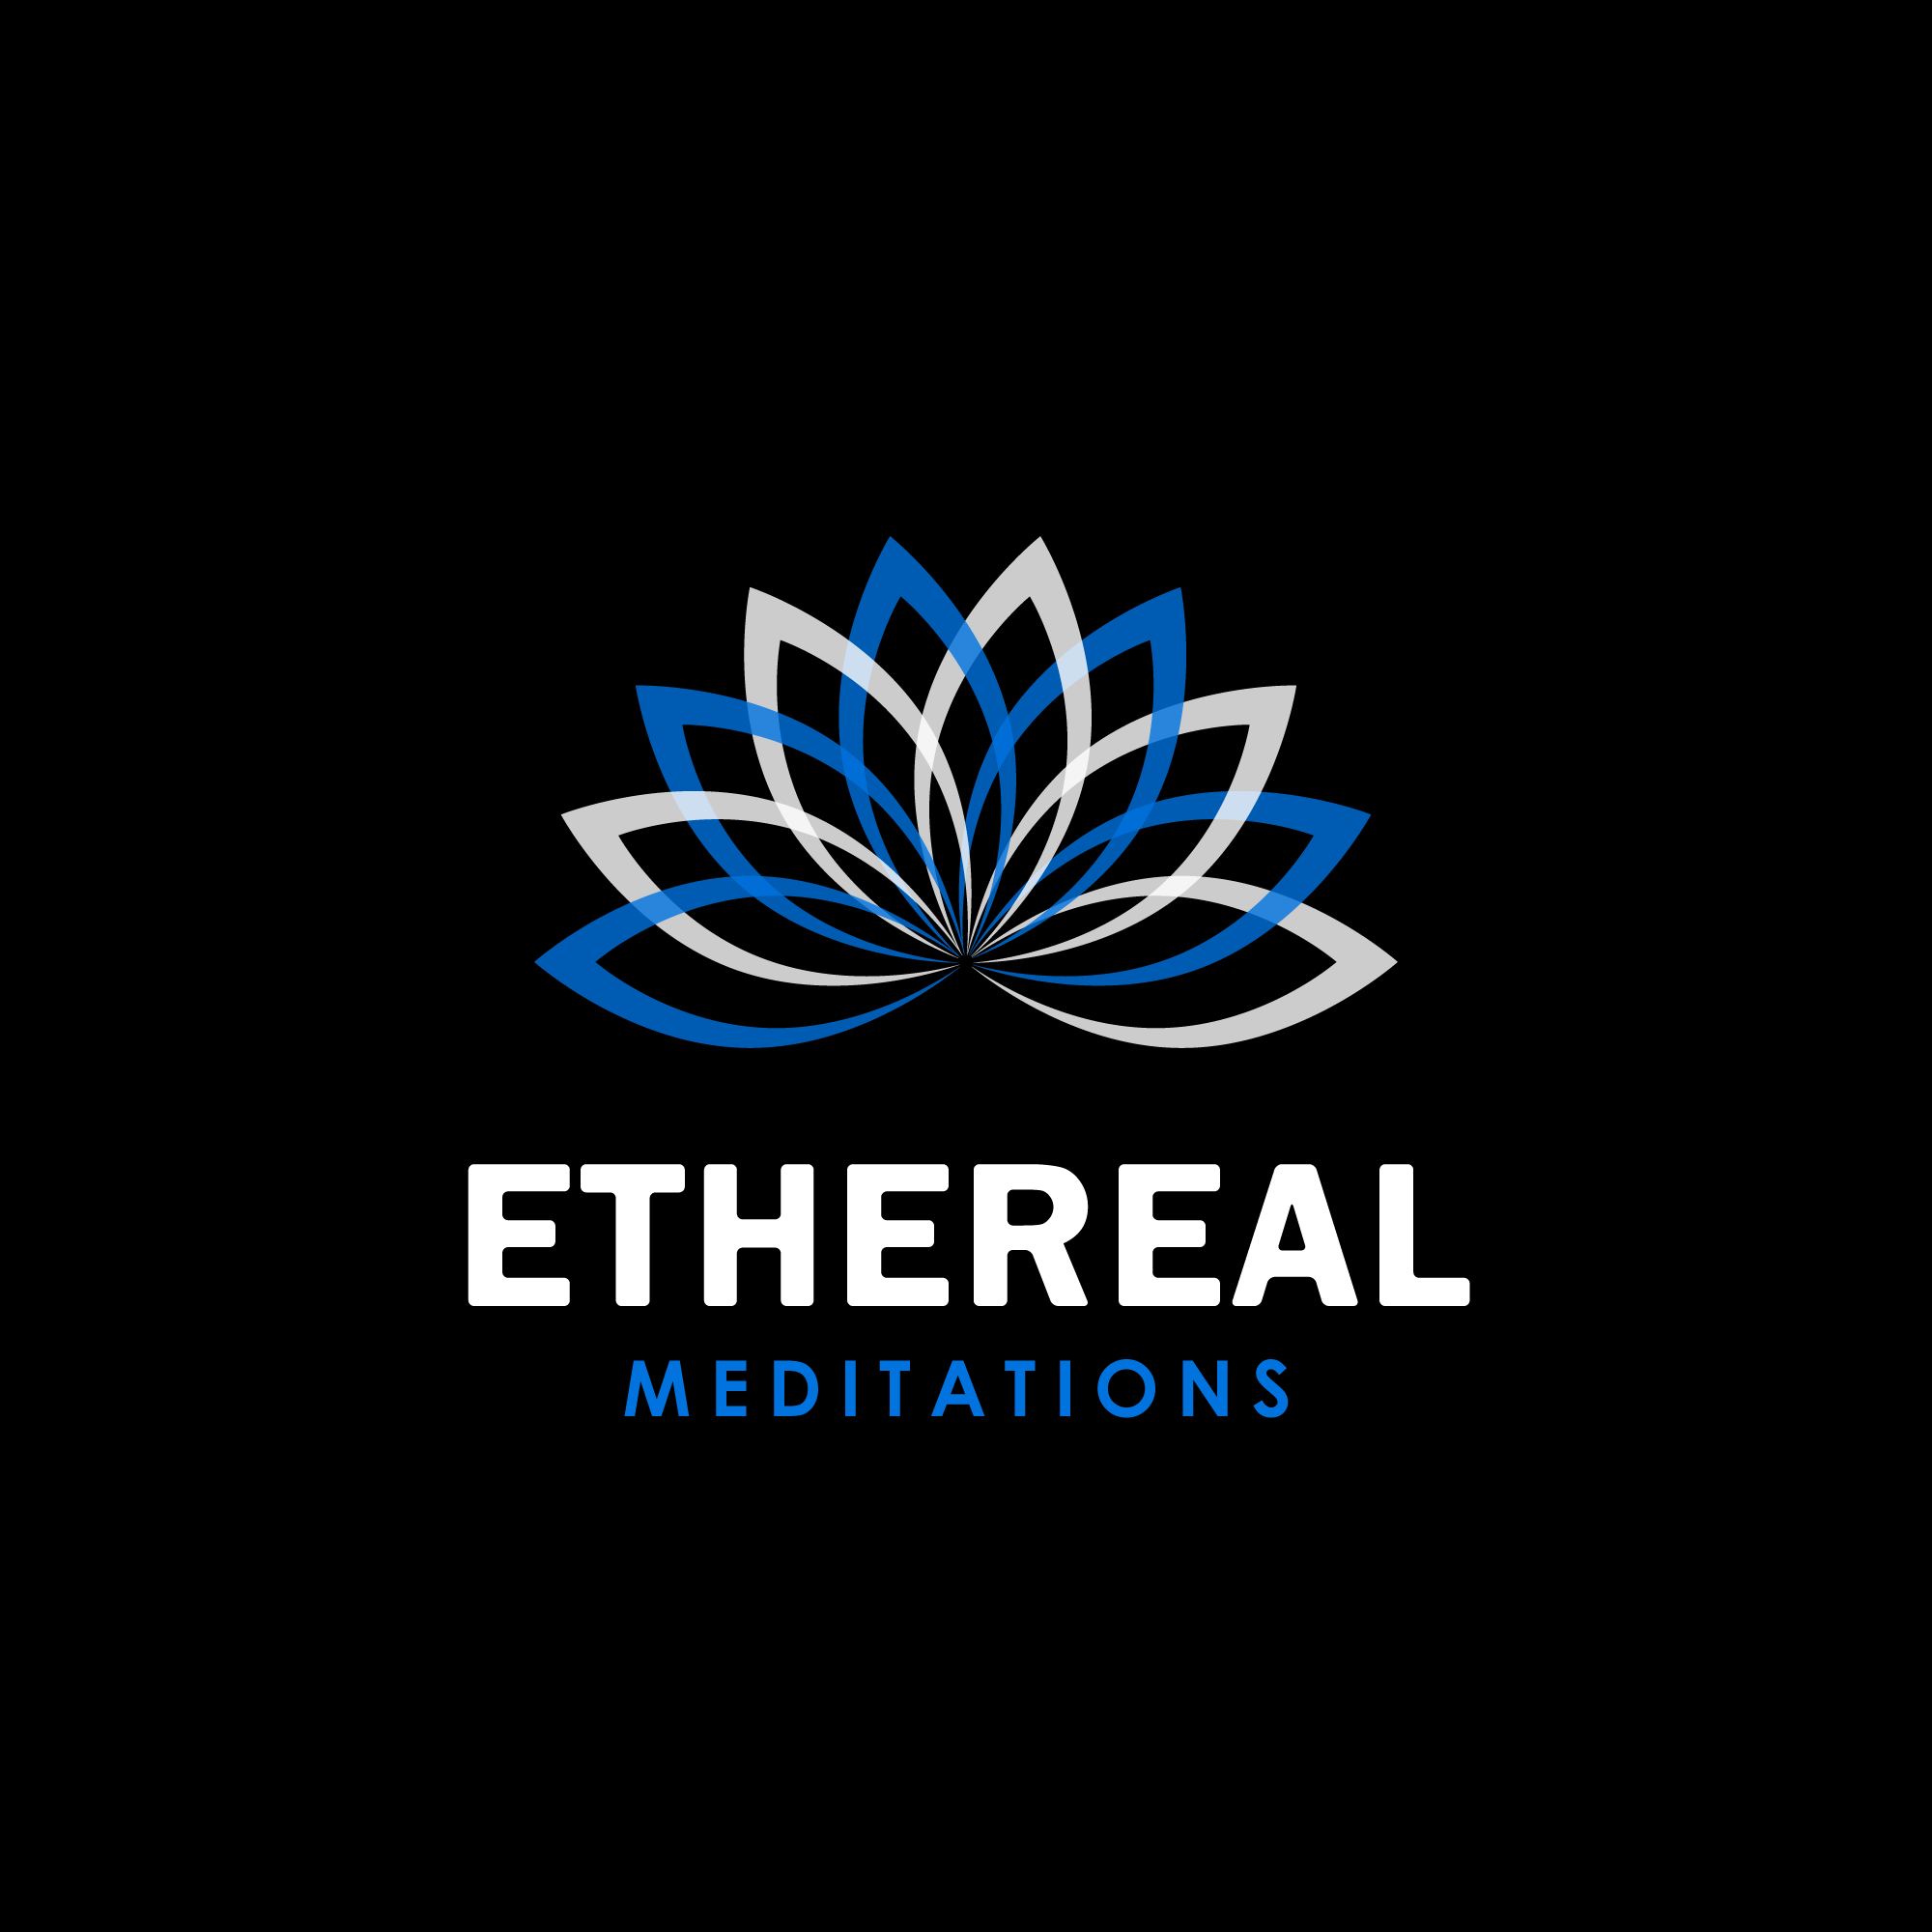 Ethereal Meditations